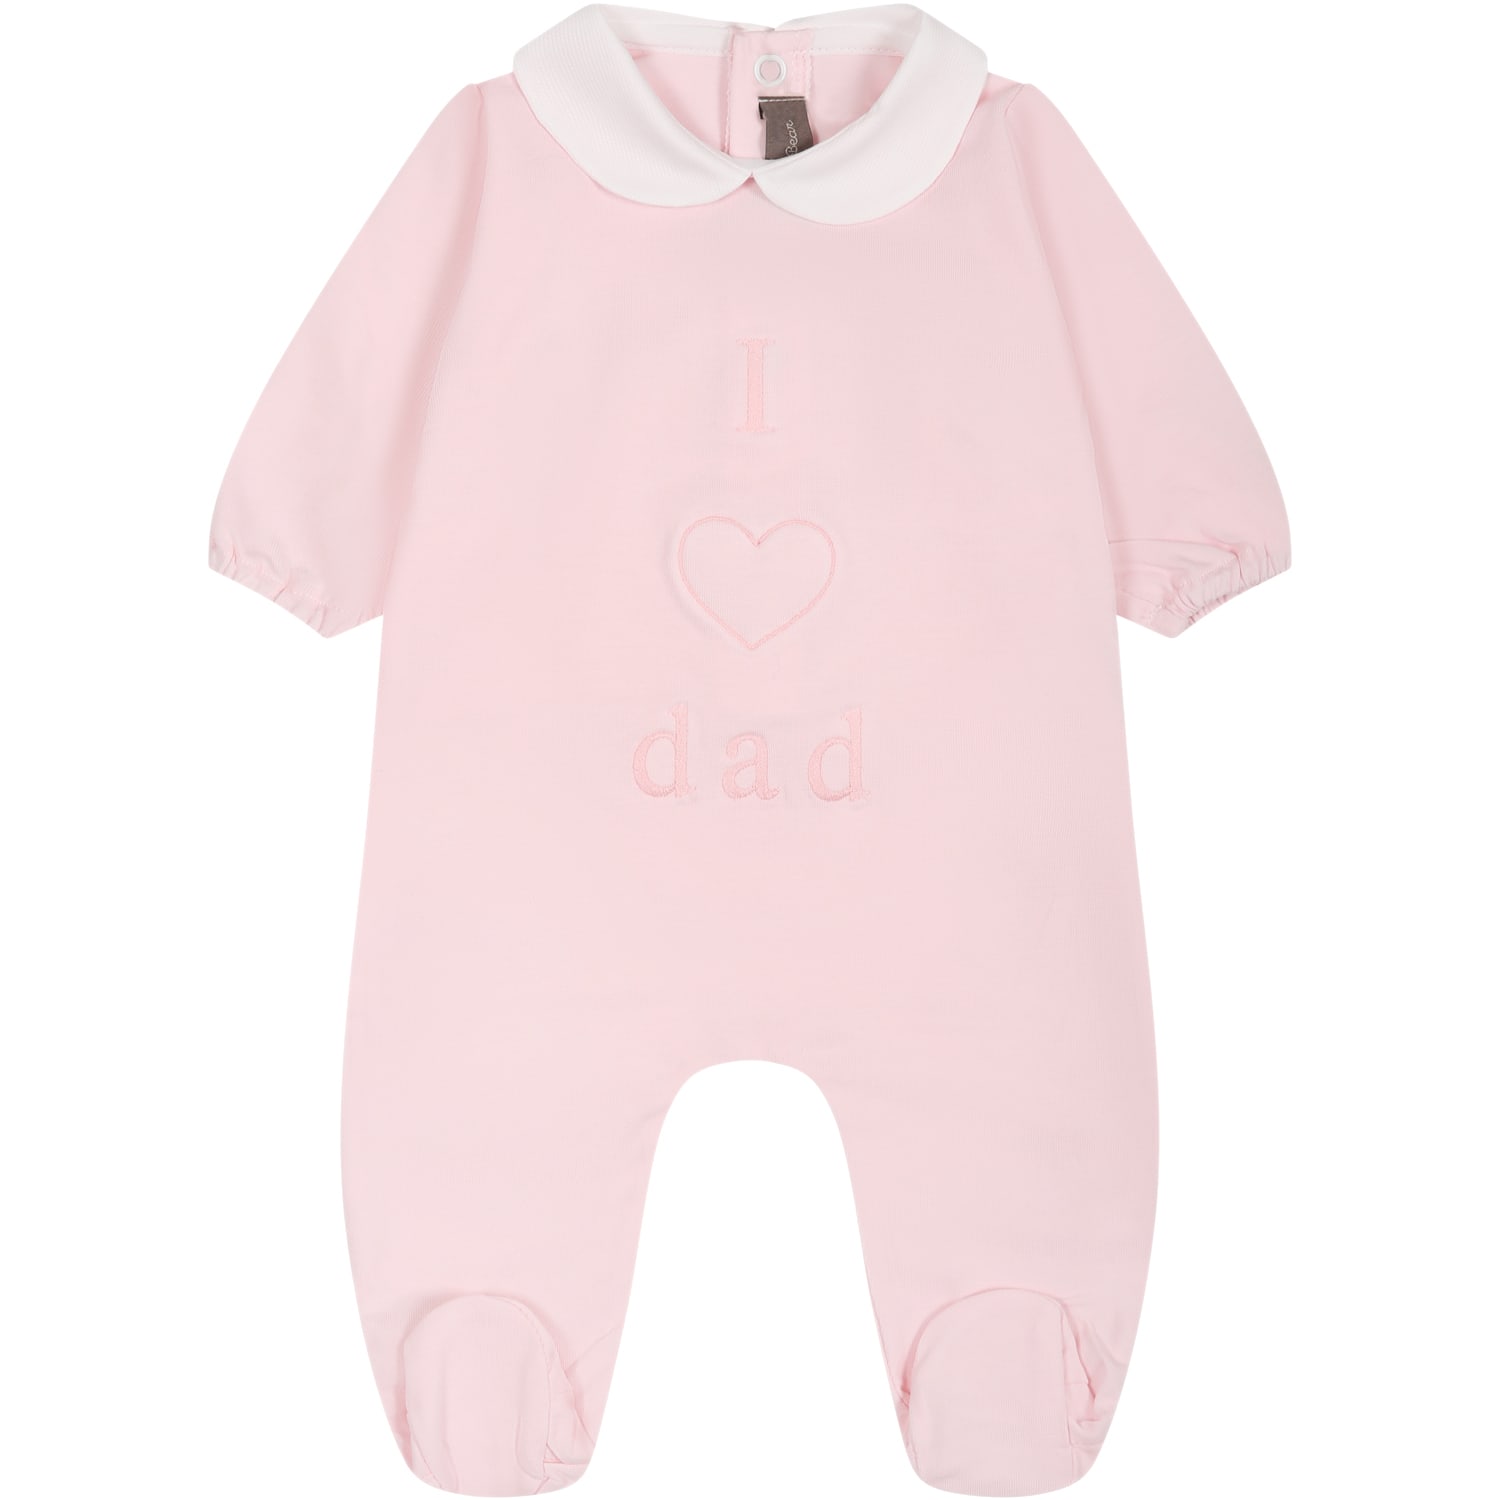 LITTLE BEAR PINK ONESIE FOR BABY GIRL WITH WRITING AND HEART